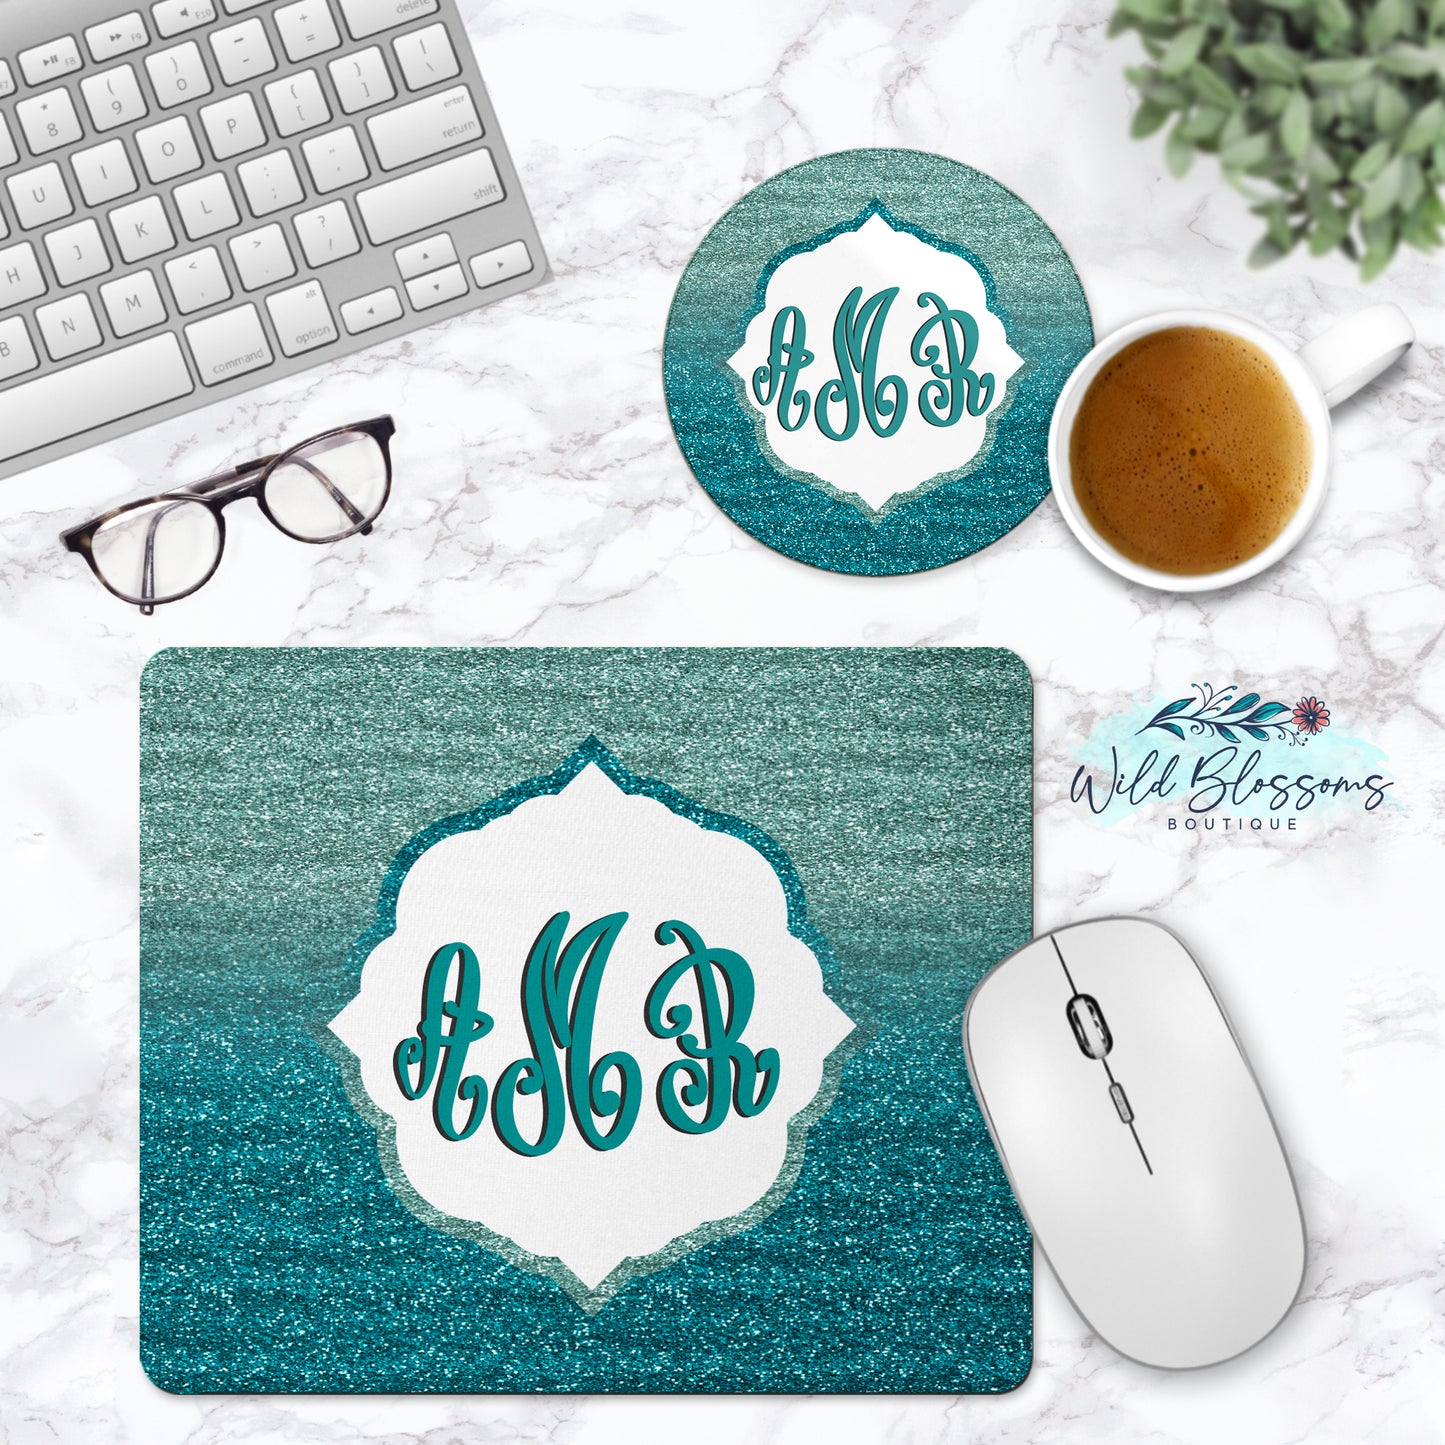 Teal Ombre Glitter Phone Stand